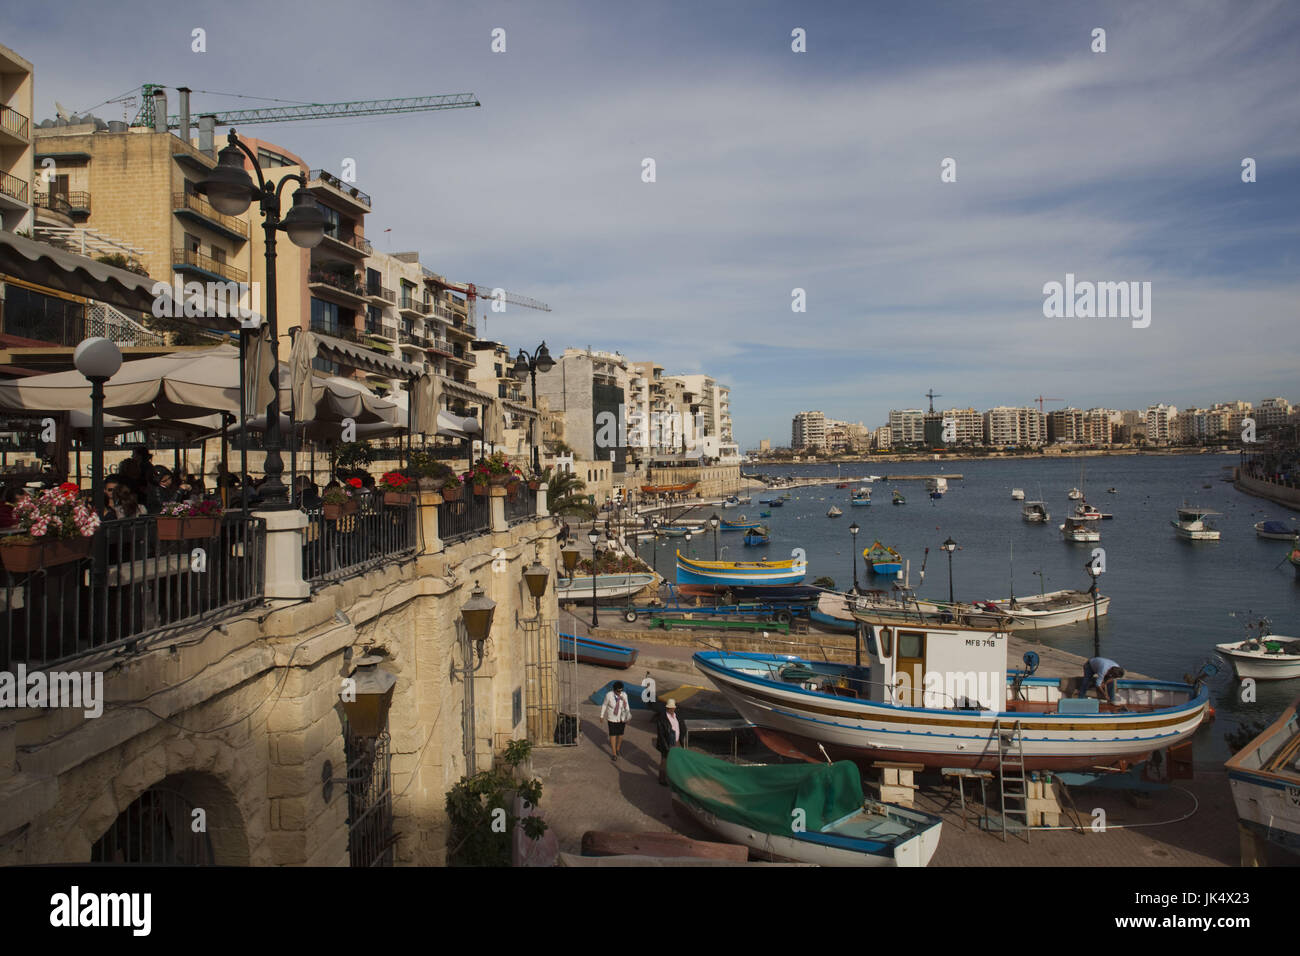 Malta, Valletta, St. Julian's, cafes and buildings of the Spinola Bay area Stock Photo